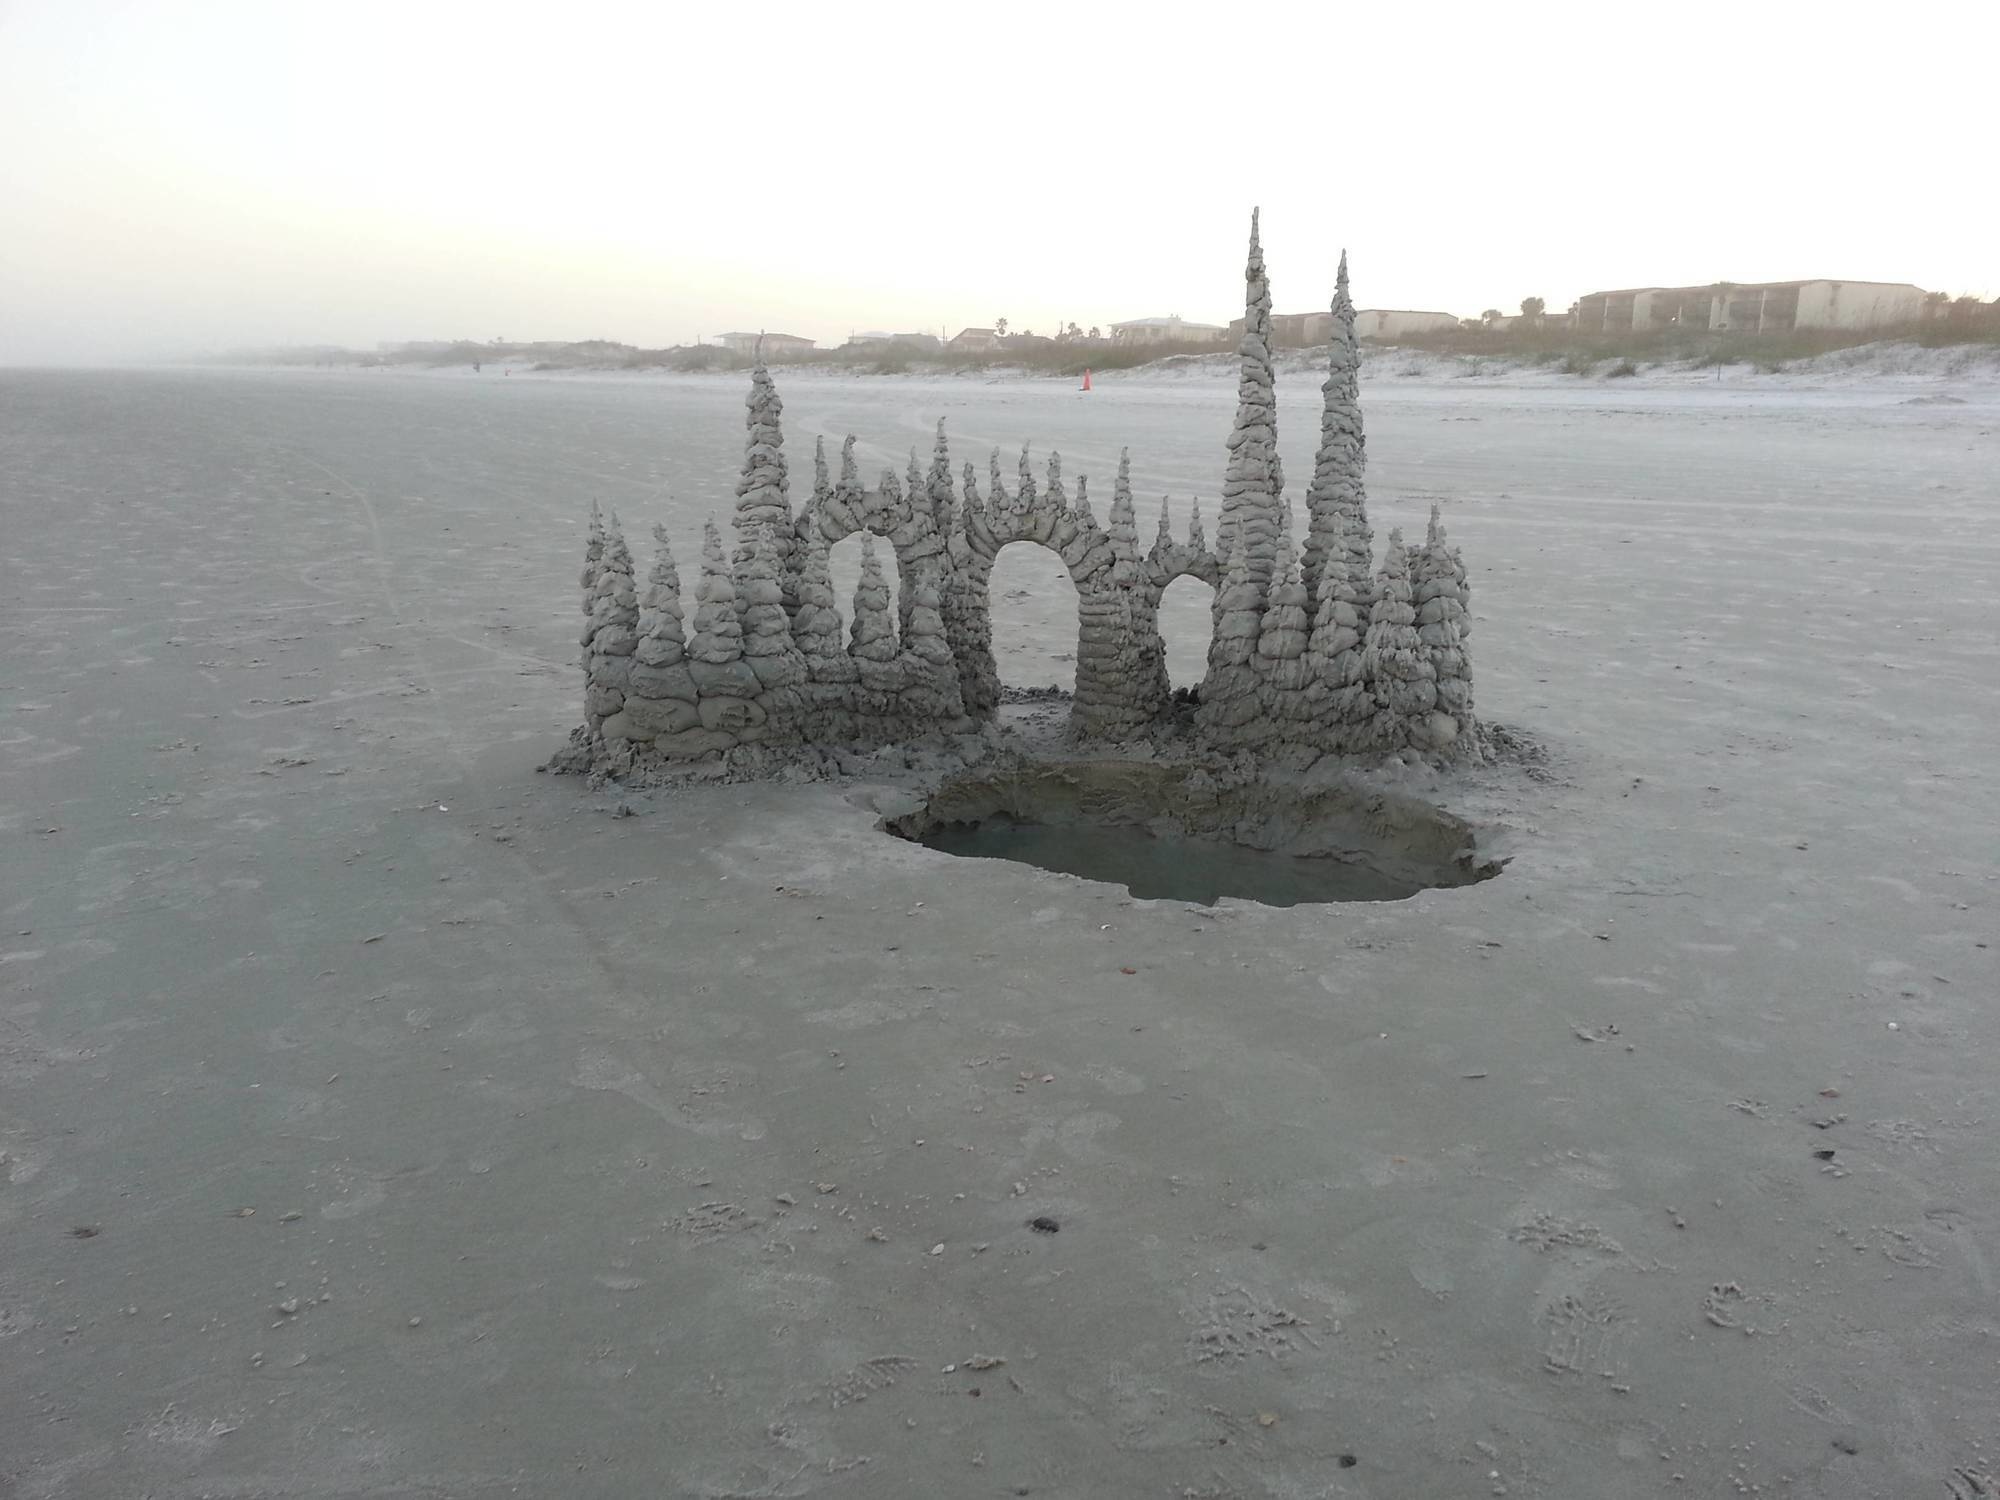 Incredible sandcastle with no artist to be found